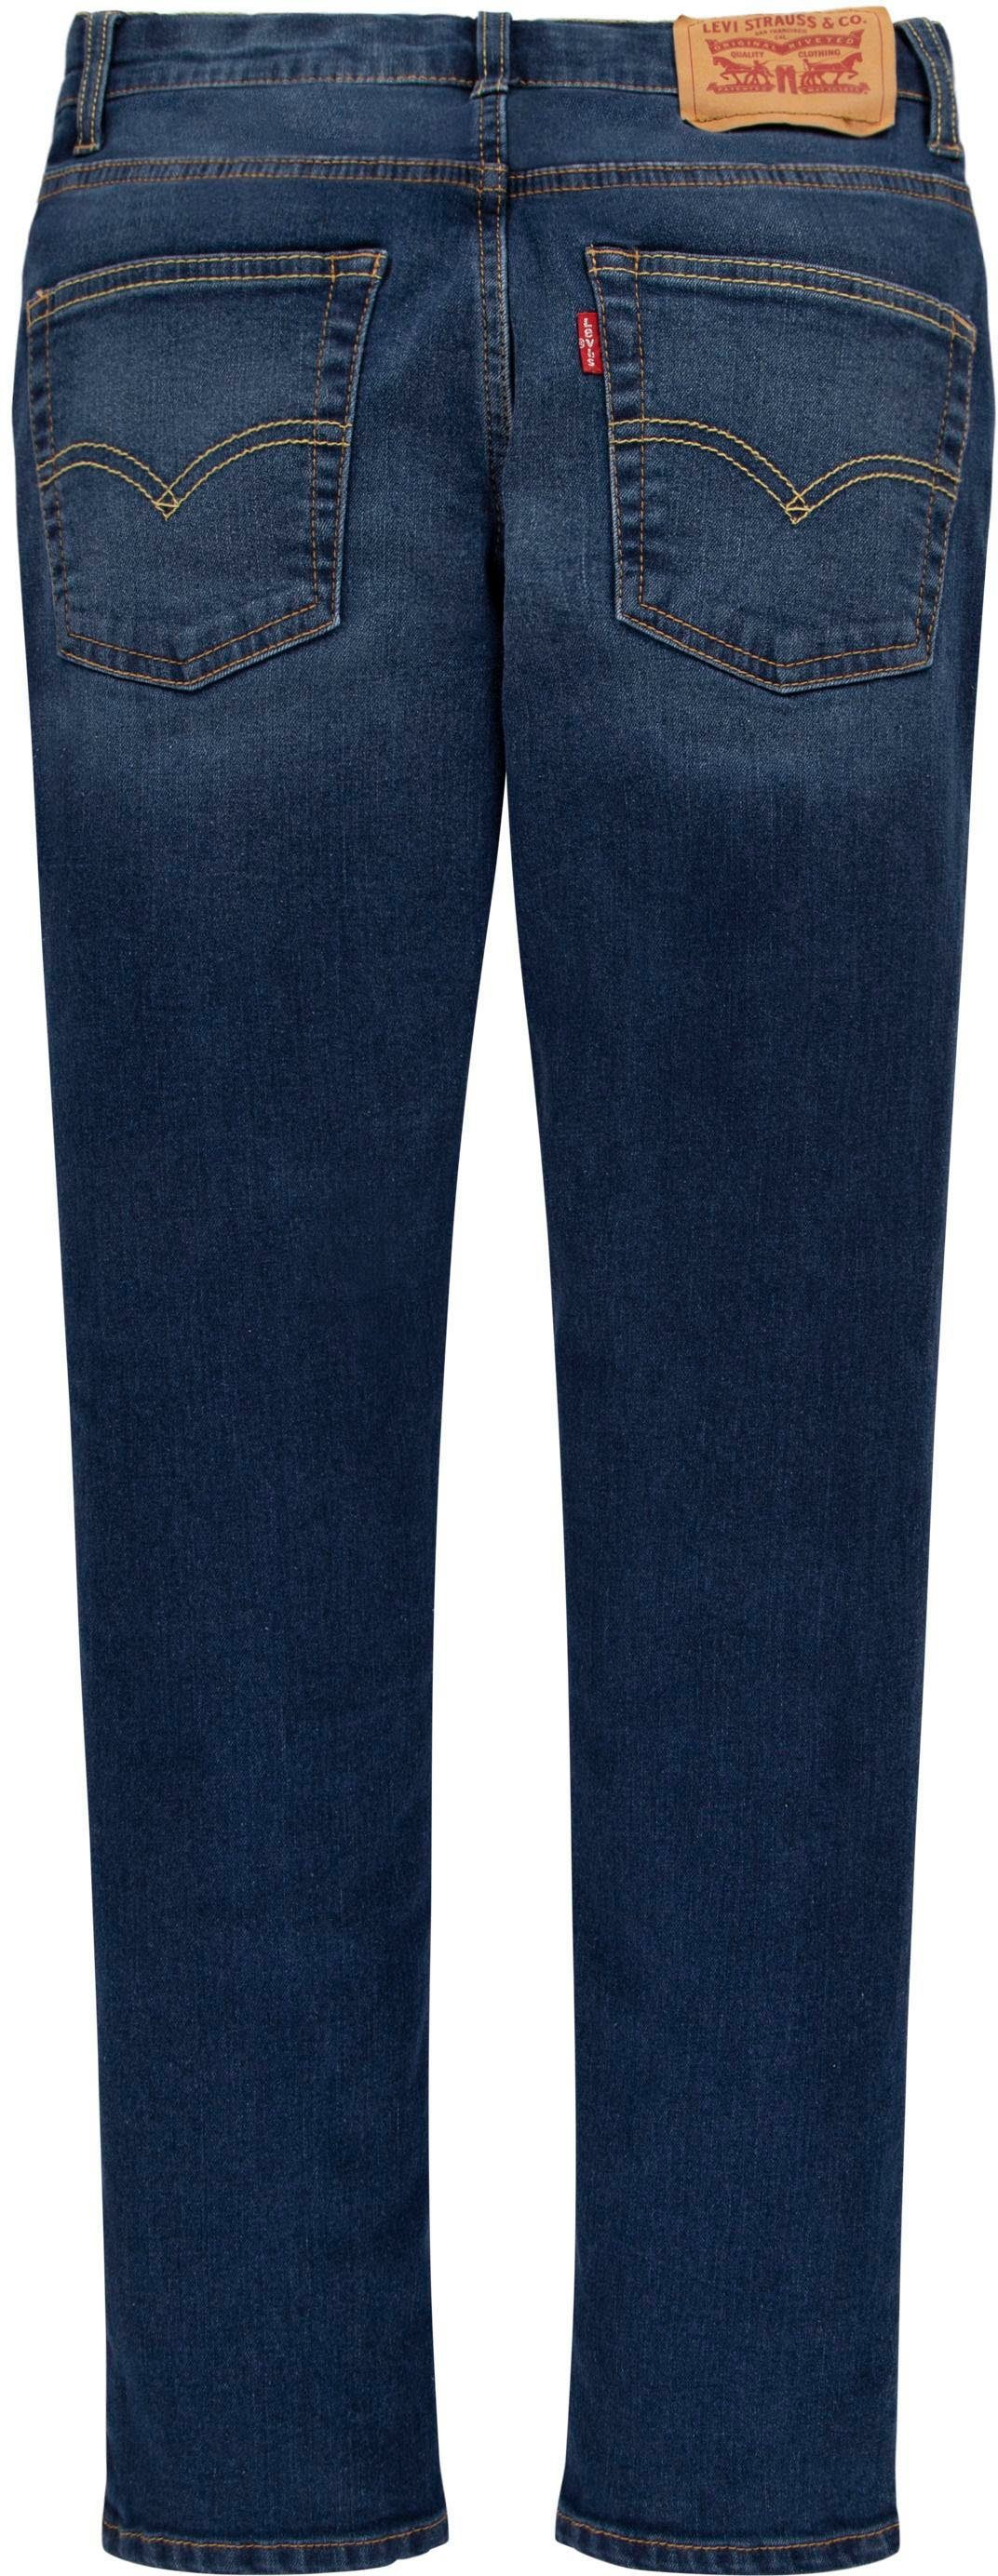 Levi's® Kids Stretch-Jeans PERFORMANCE STRONG BOYS garland for 512